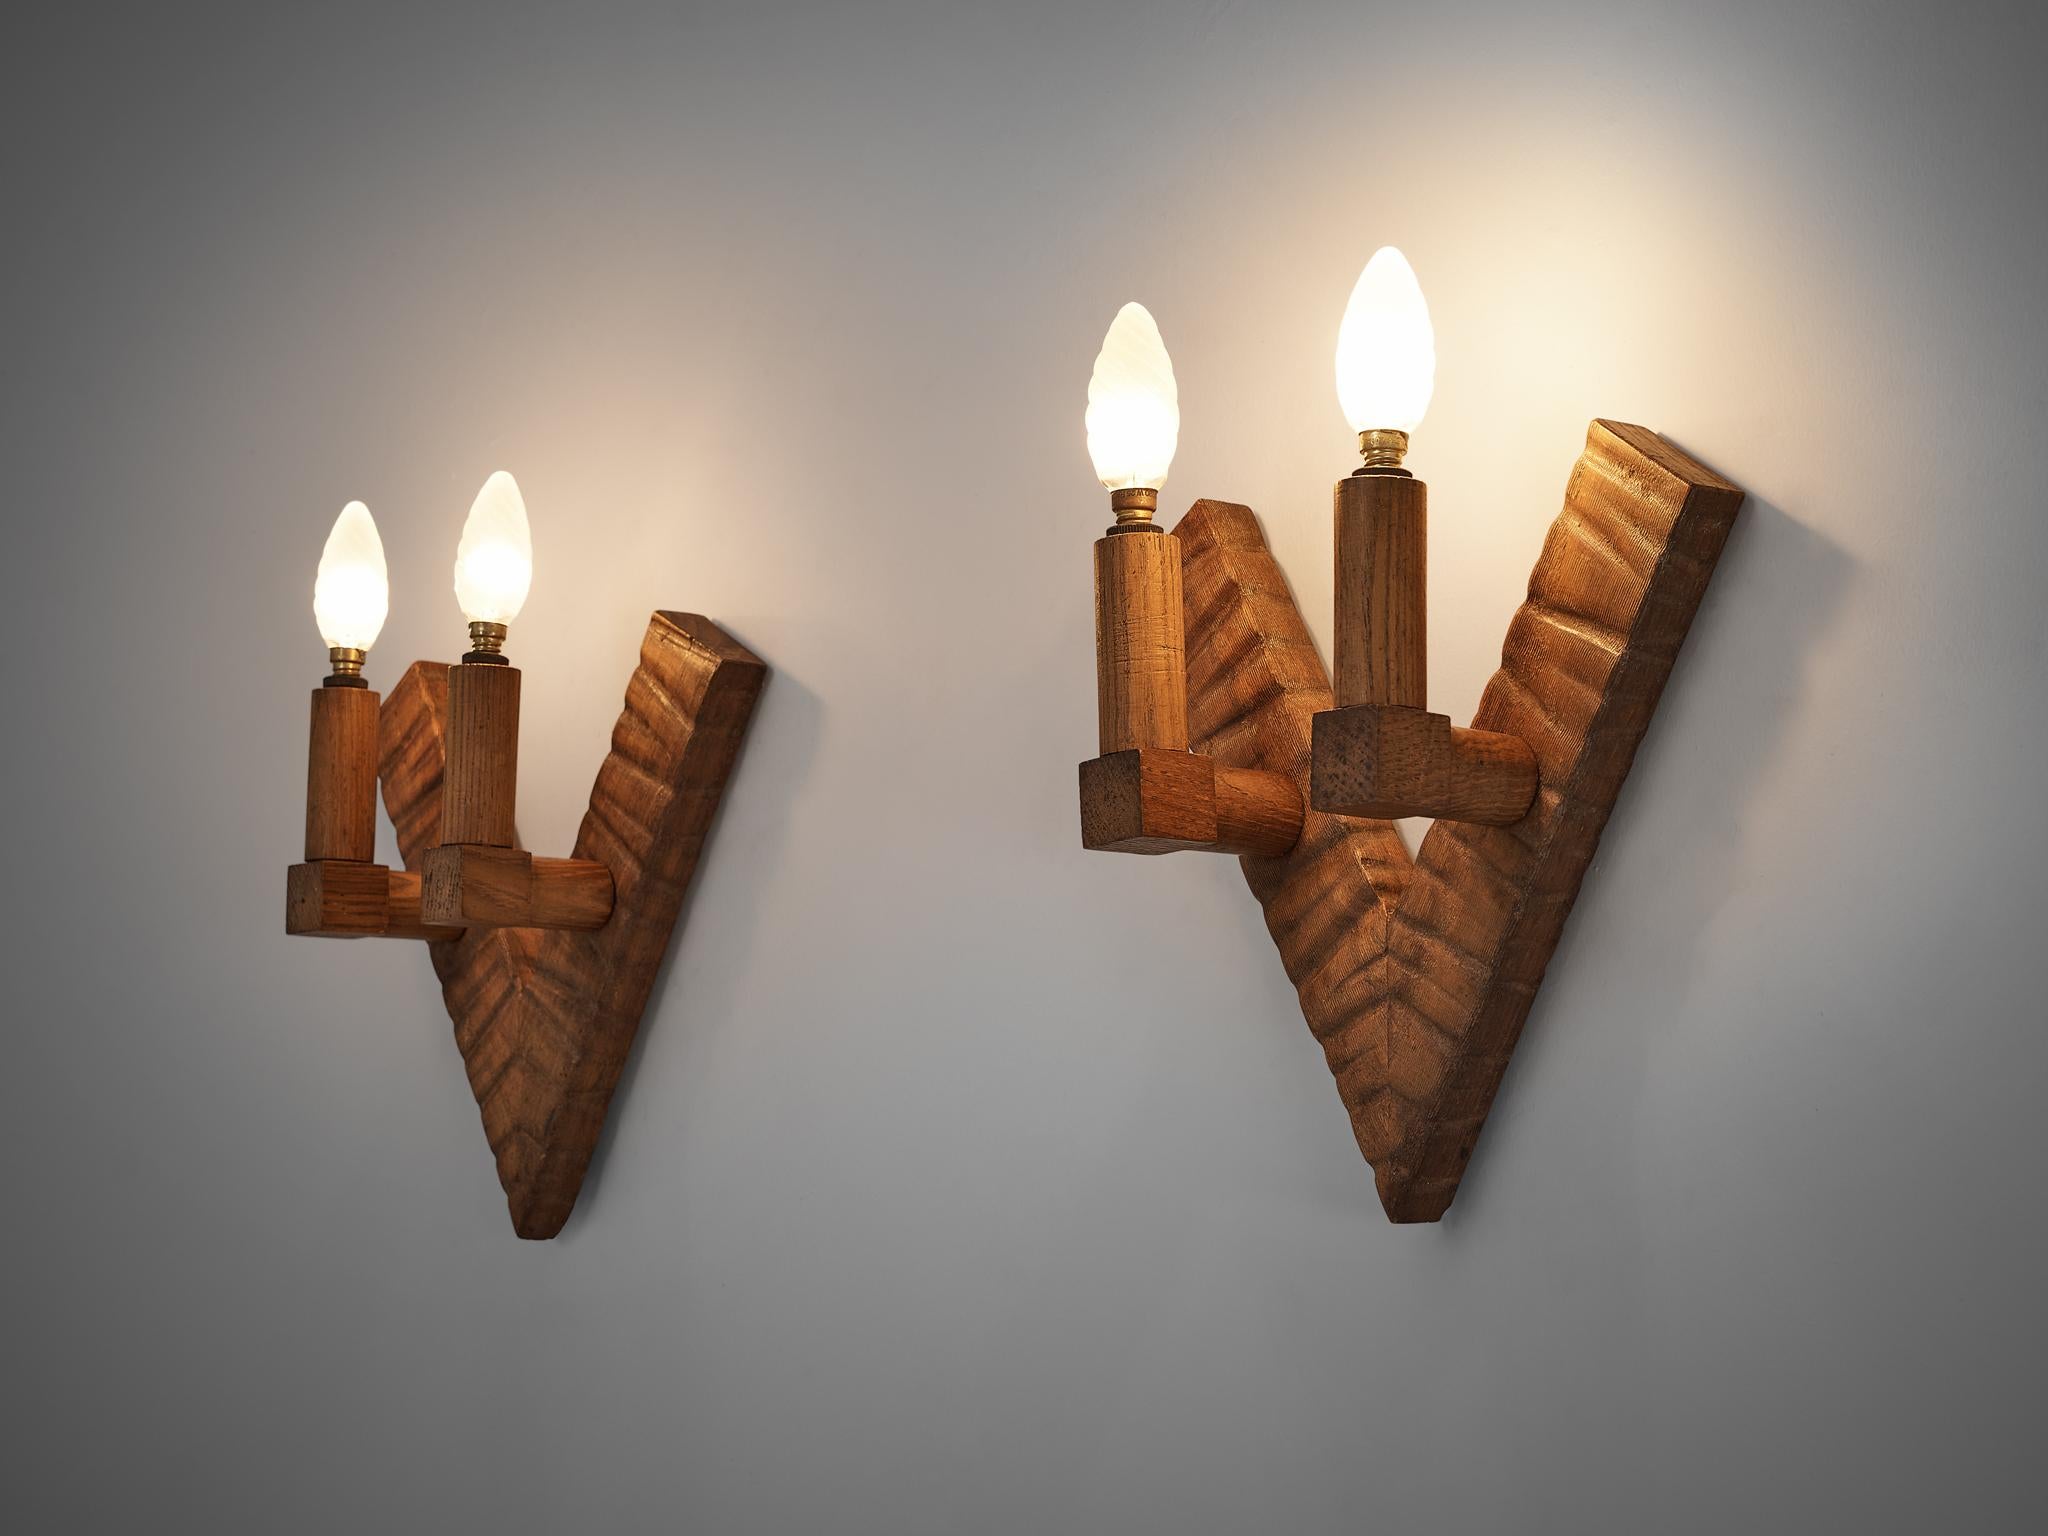 Ernesto Valabrega, pair of wall lights, metal, oak, Italy, ca. 1935

Ernesto Valabrega designed a rather particular pair of wall lighs. The V-shaped frame has a very structured look, giving it a vivid character. Attatched to the frame are two beams